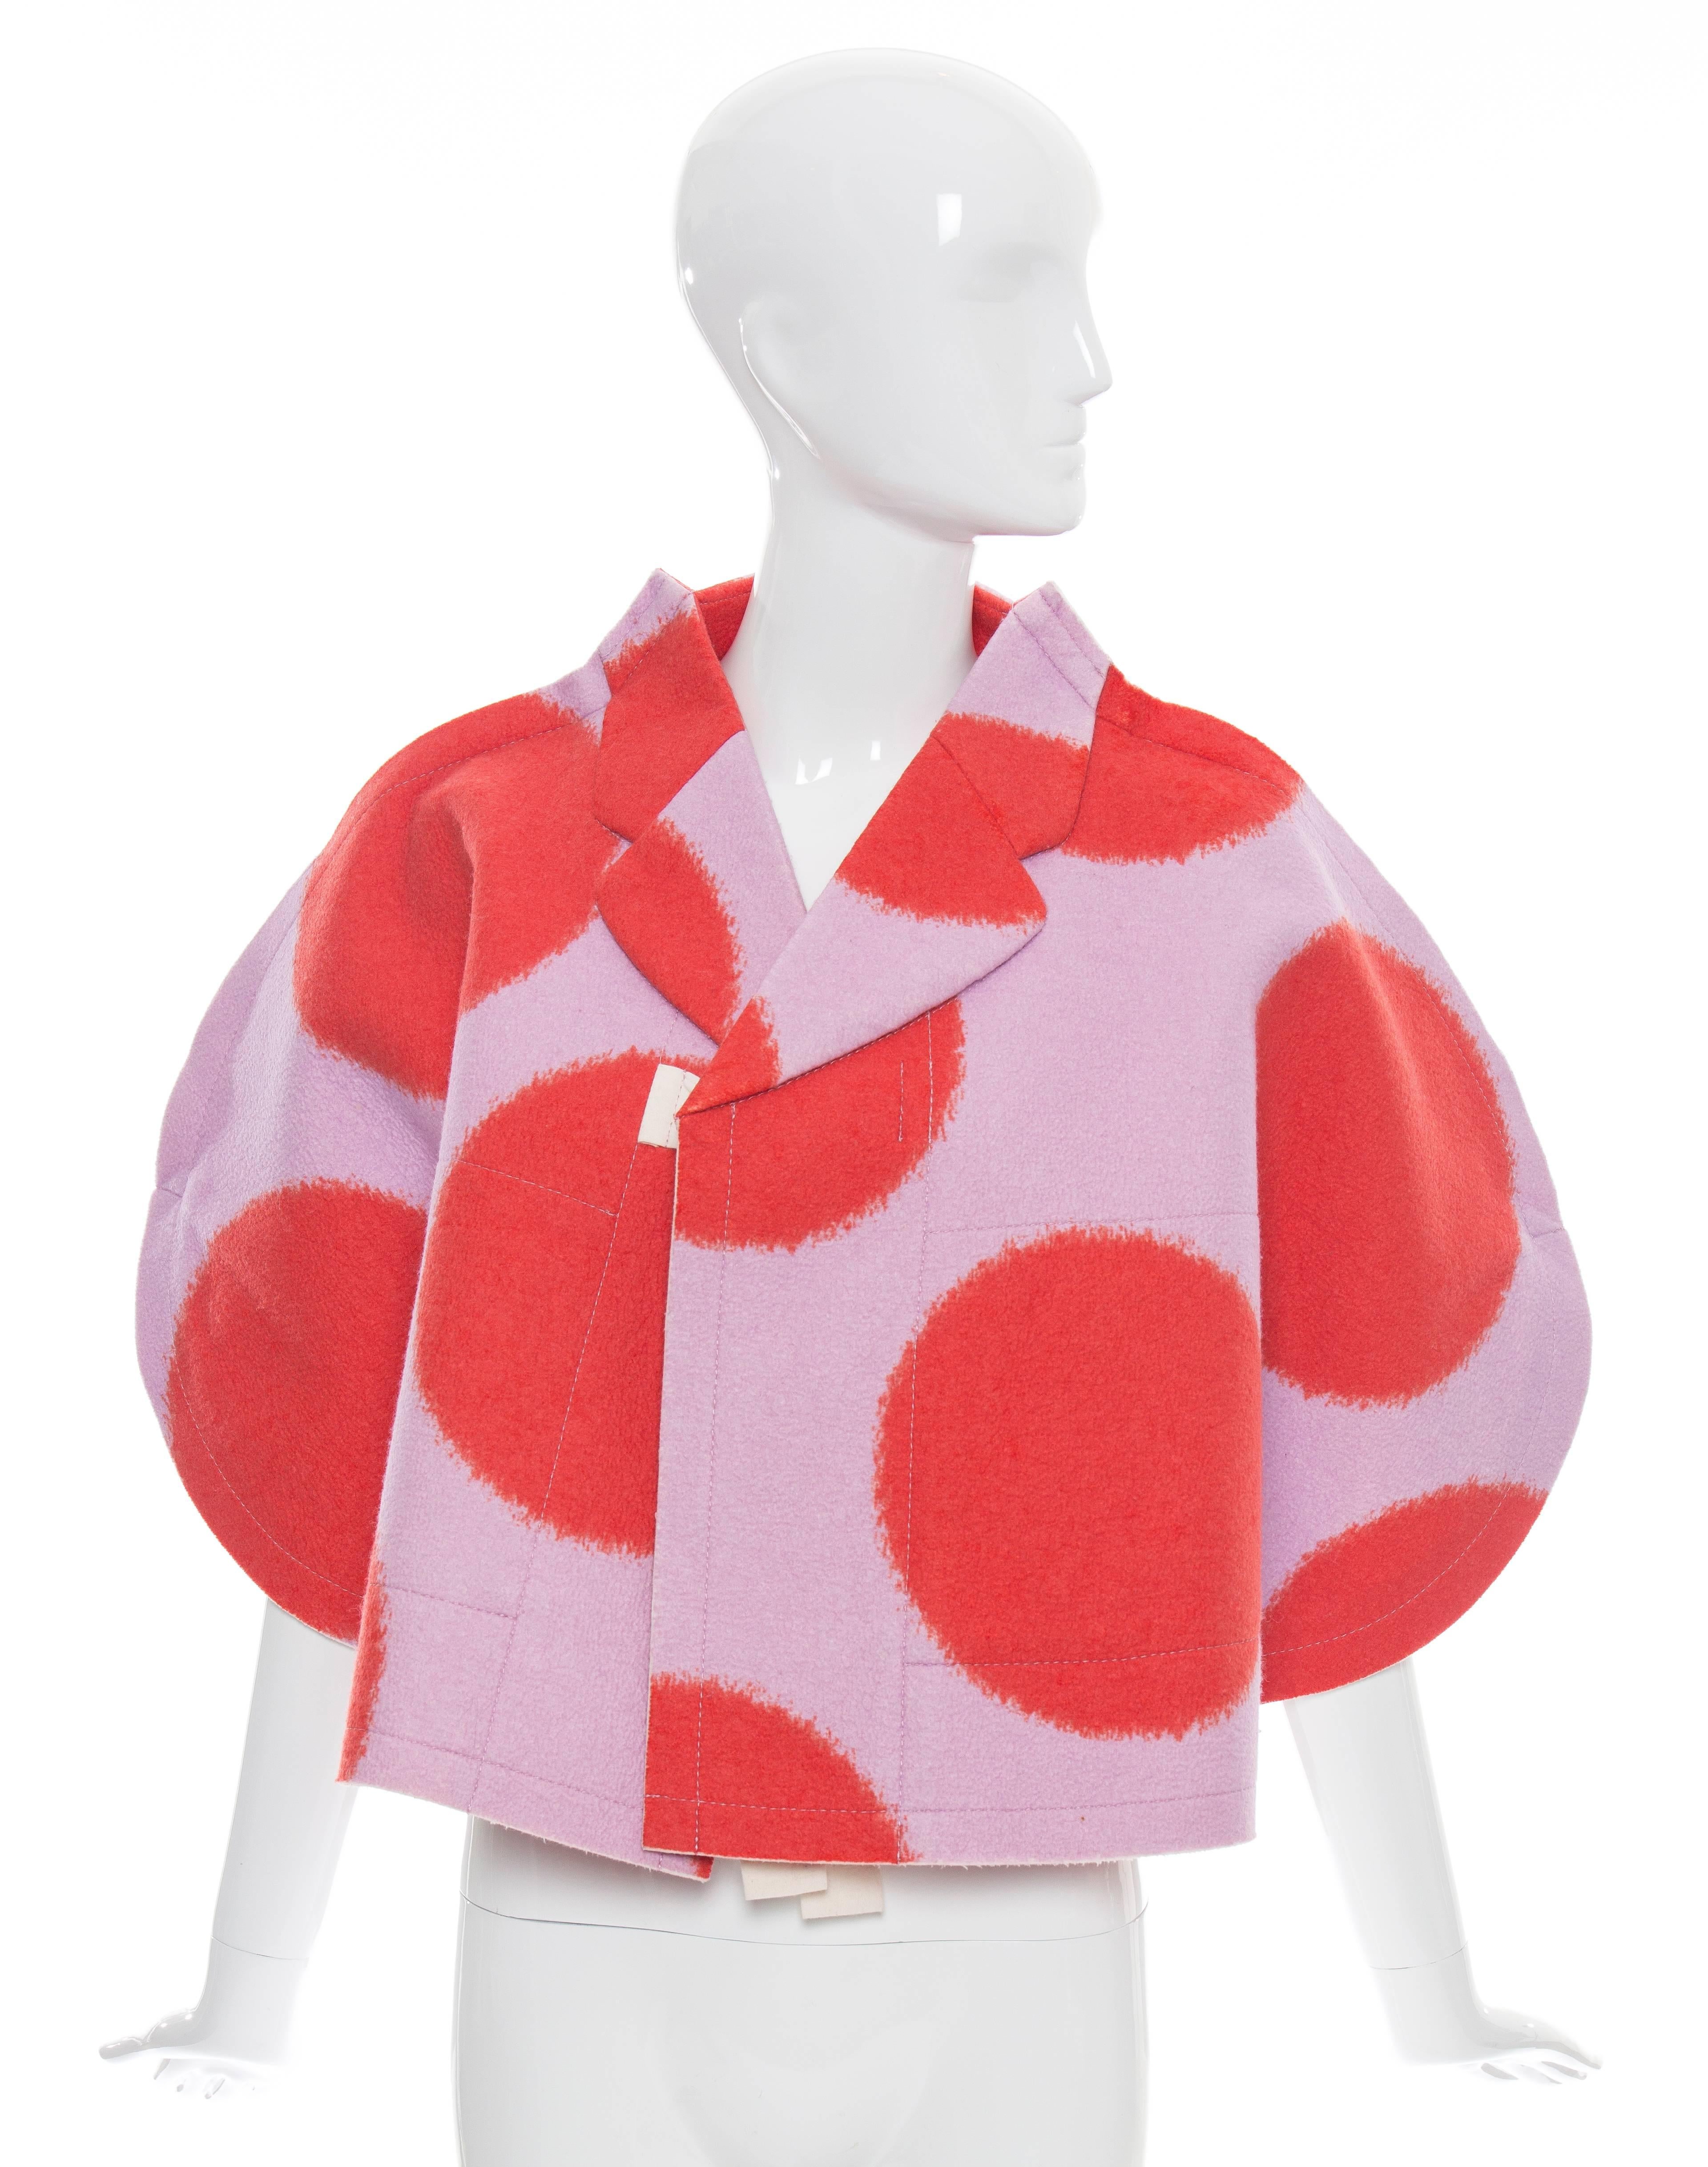  Comme des Garçons, Autumn-Winter 2012, wool polka dot felt cape with notched collar, dual internal pockets and front tie closure.

Japan: Small

Length 20”

Fabric Content: 60% Wool, 40% Rayon; Lining: 100% Polyester